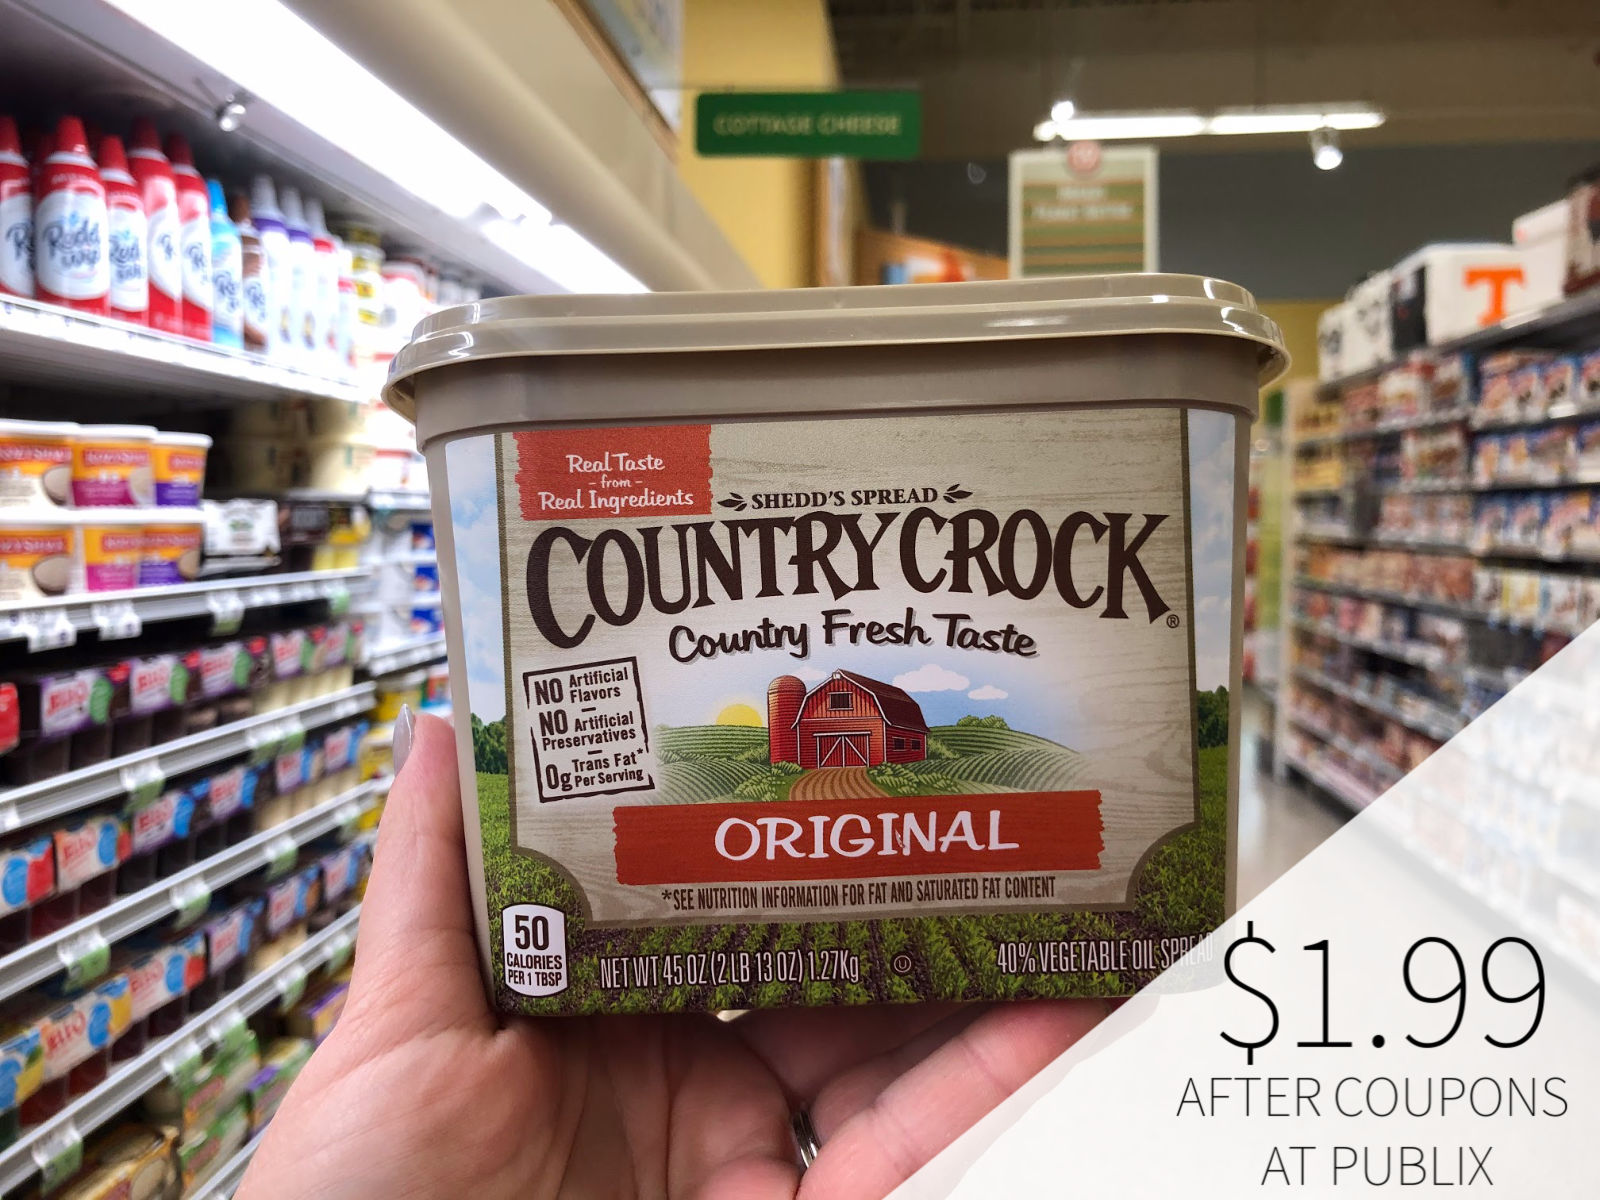 Can't Miss Deal On Country Crock Spread Available Now At Publix on I Heart Publix